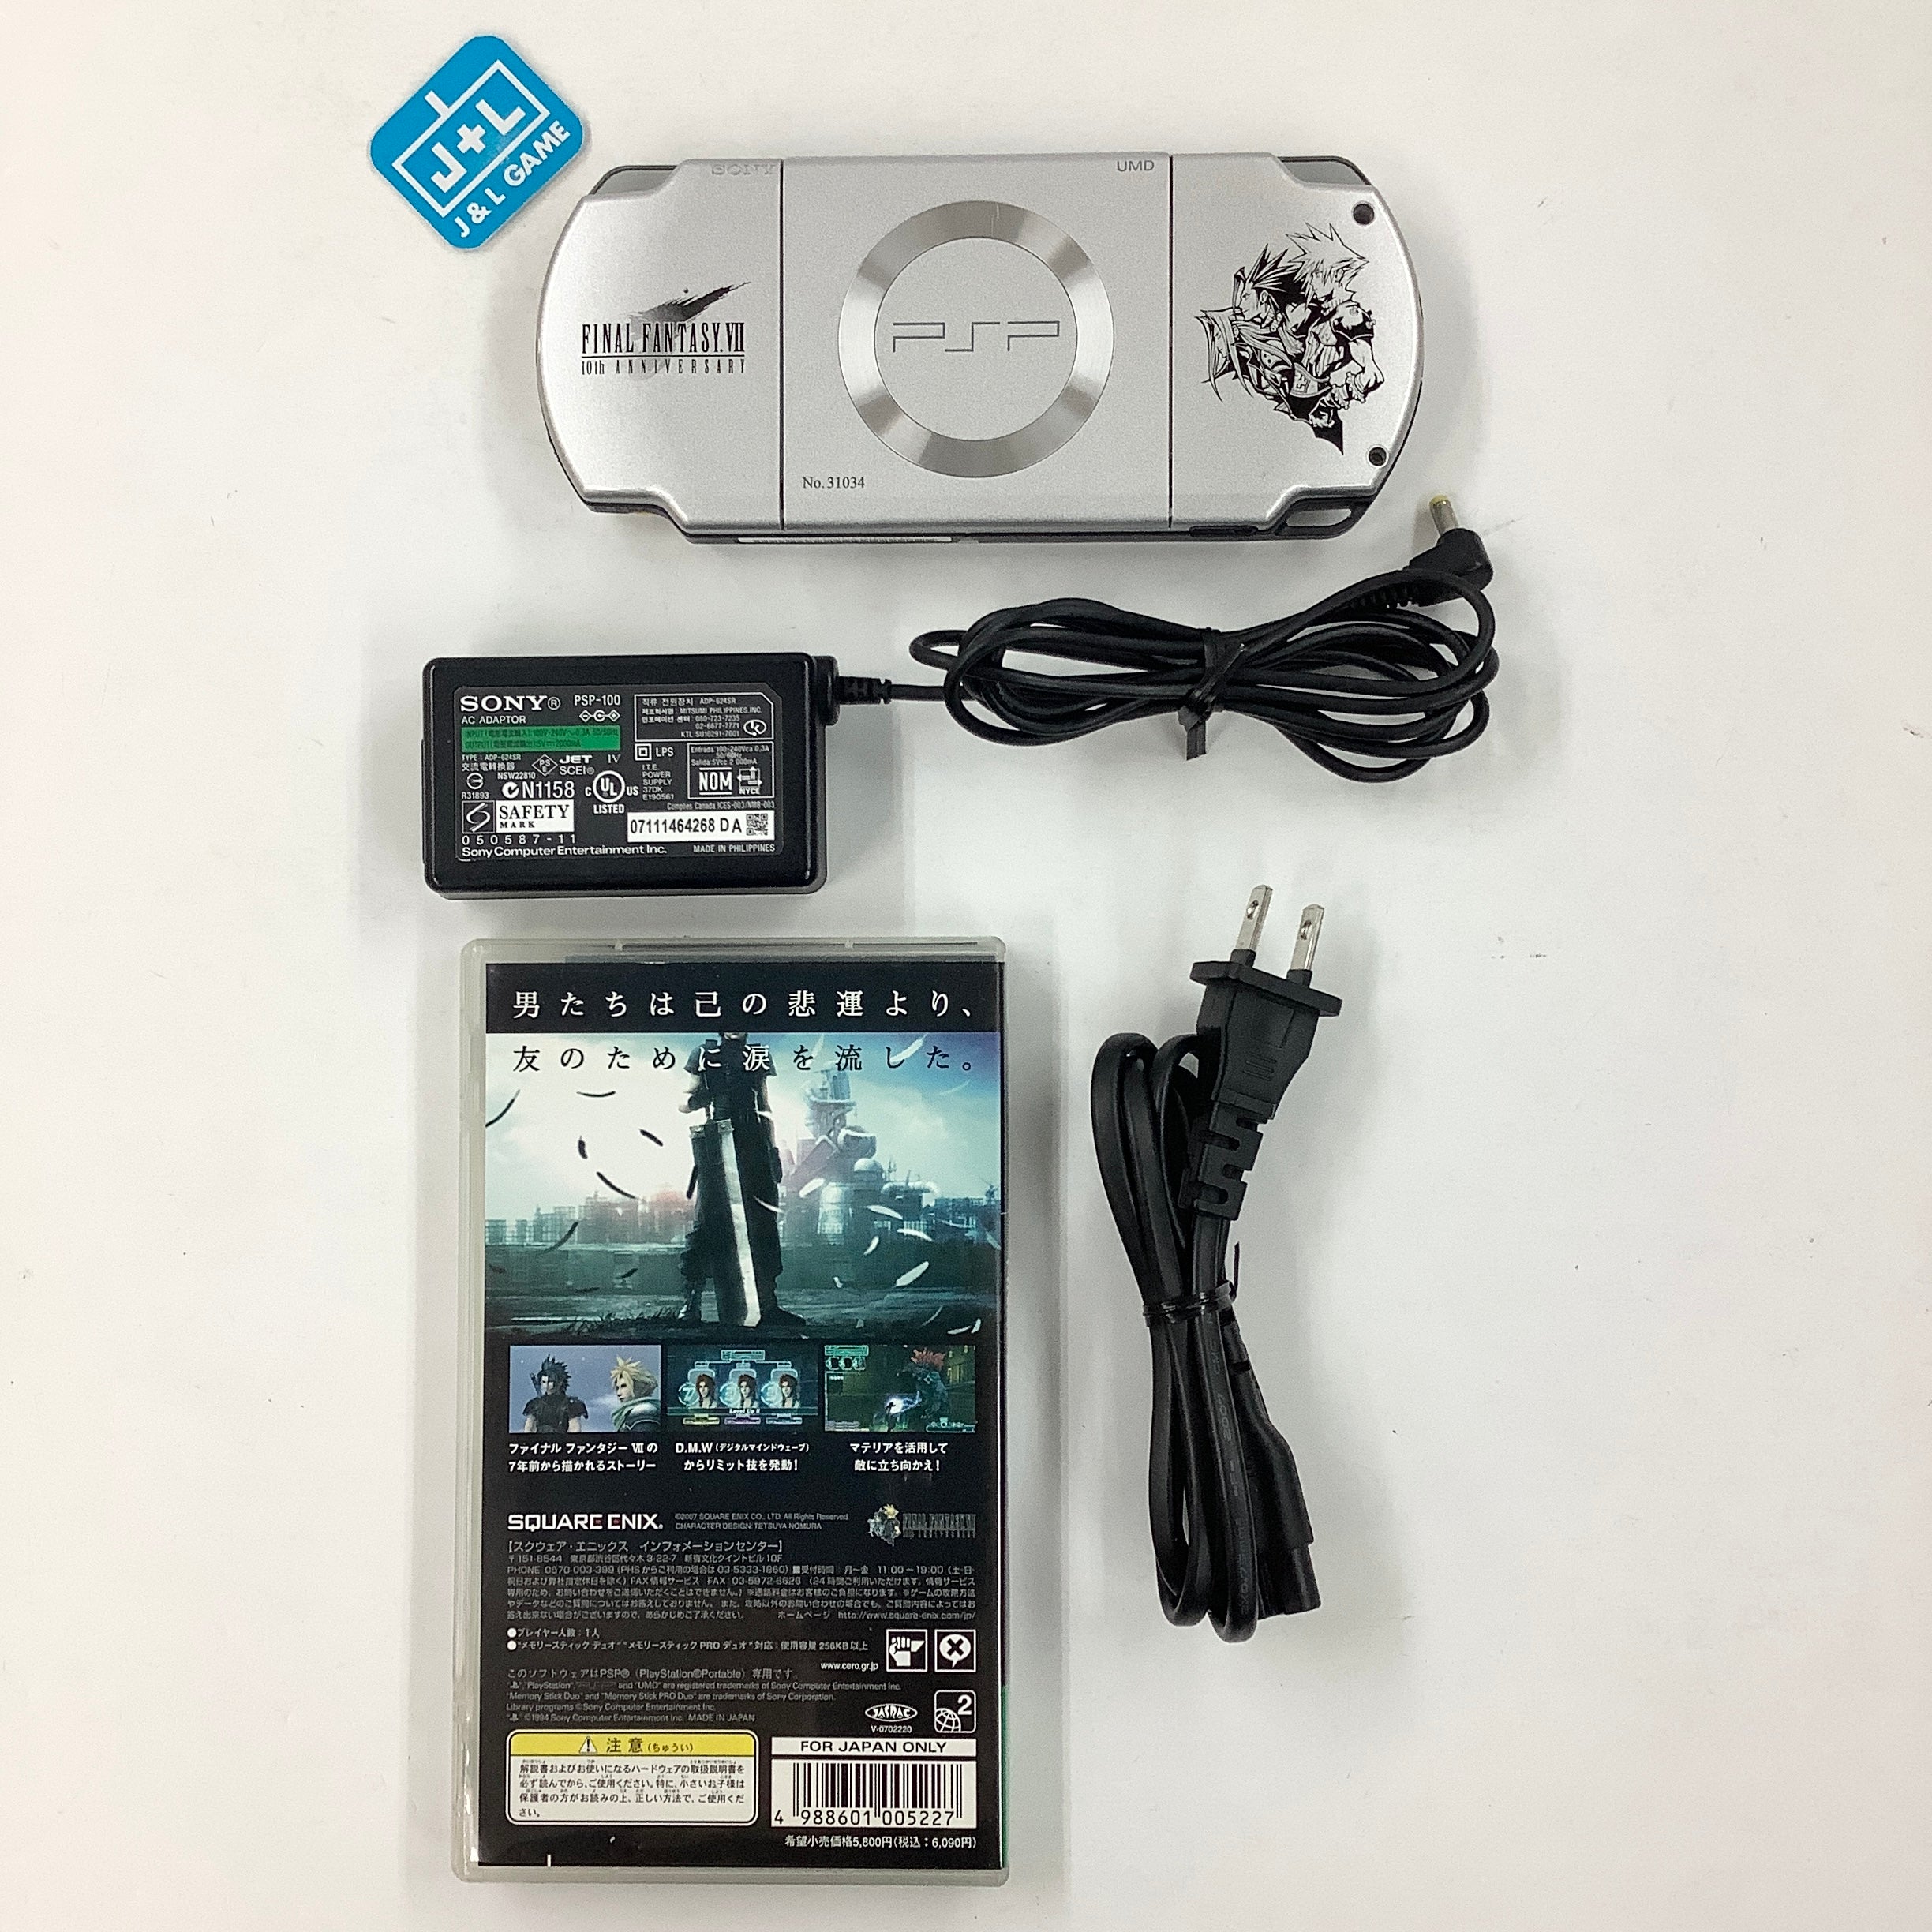 Crisis Core Final Fantasy VII - (FFVII 10th Anniversary Limited) PSP 2000 Bundle - (PSP) Sony PSP [Pre-Owned] (Japanese Import) Consoles Square Enix   